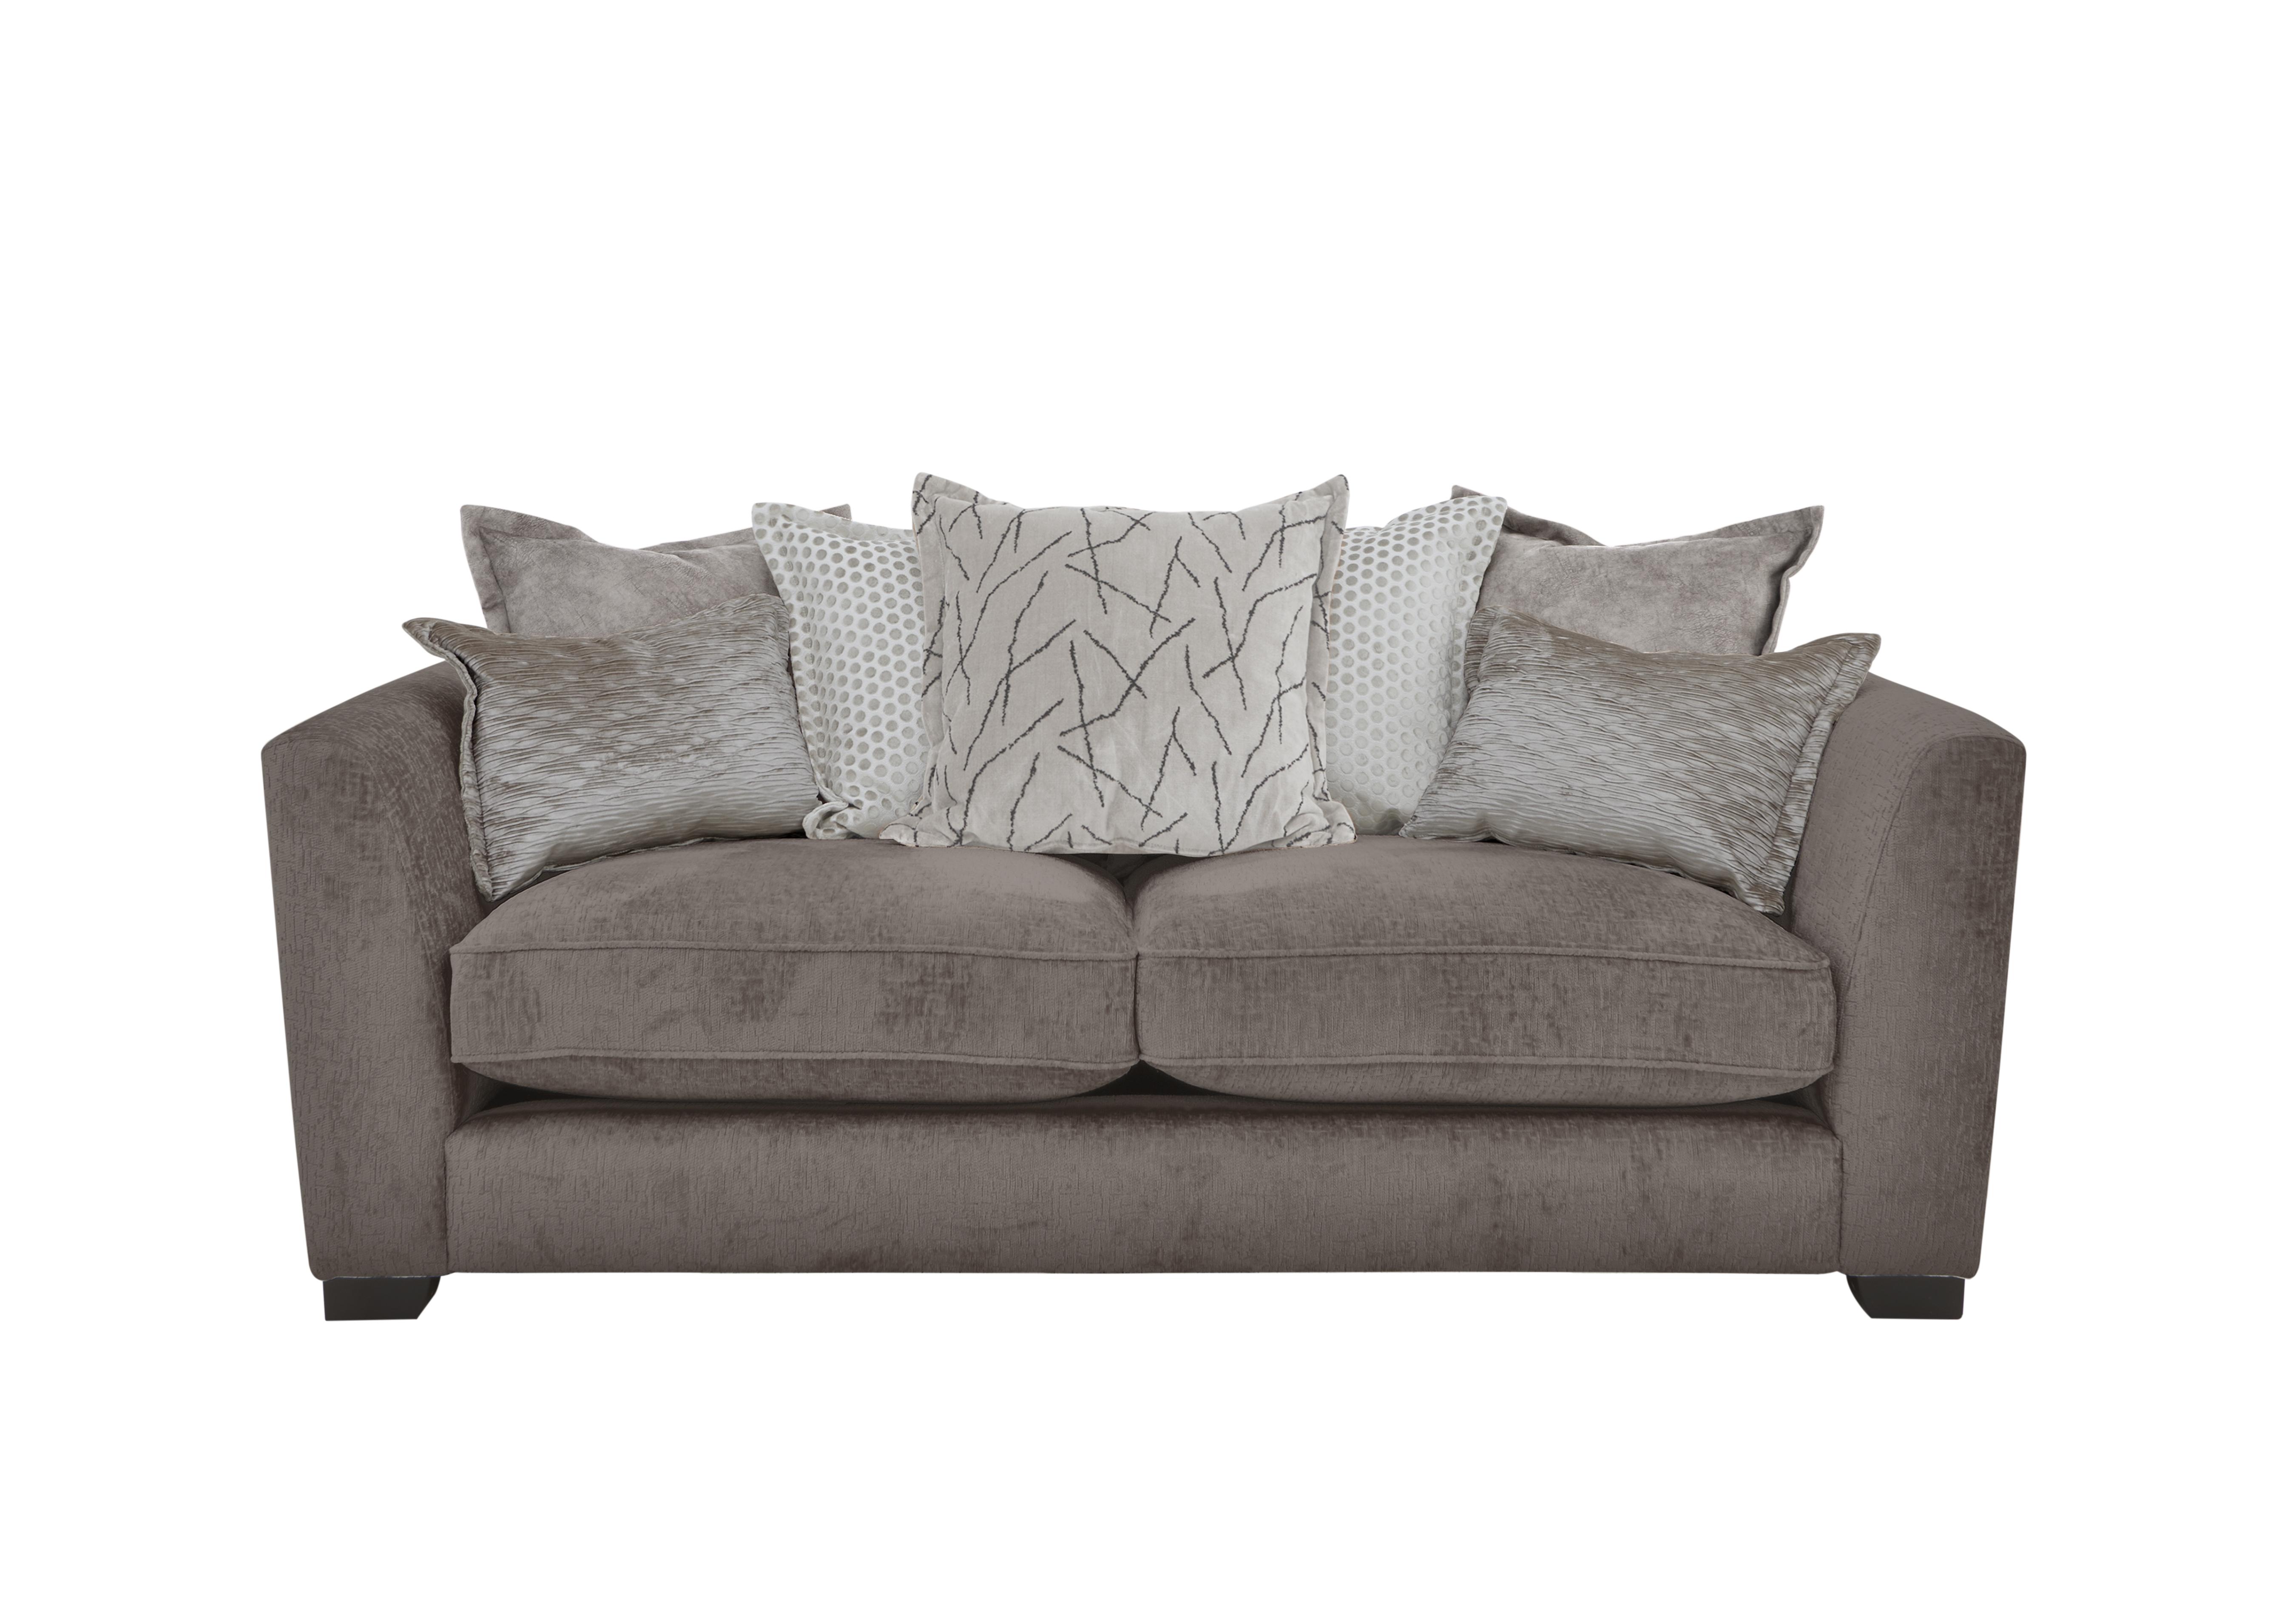 Boutique Lavish Fabric 3 Seater Scatter Back Sofa in Alexandra Grey on Furniture Village